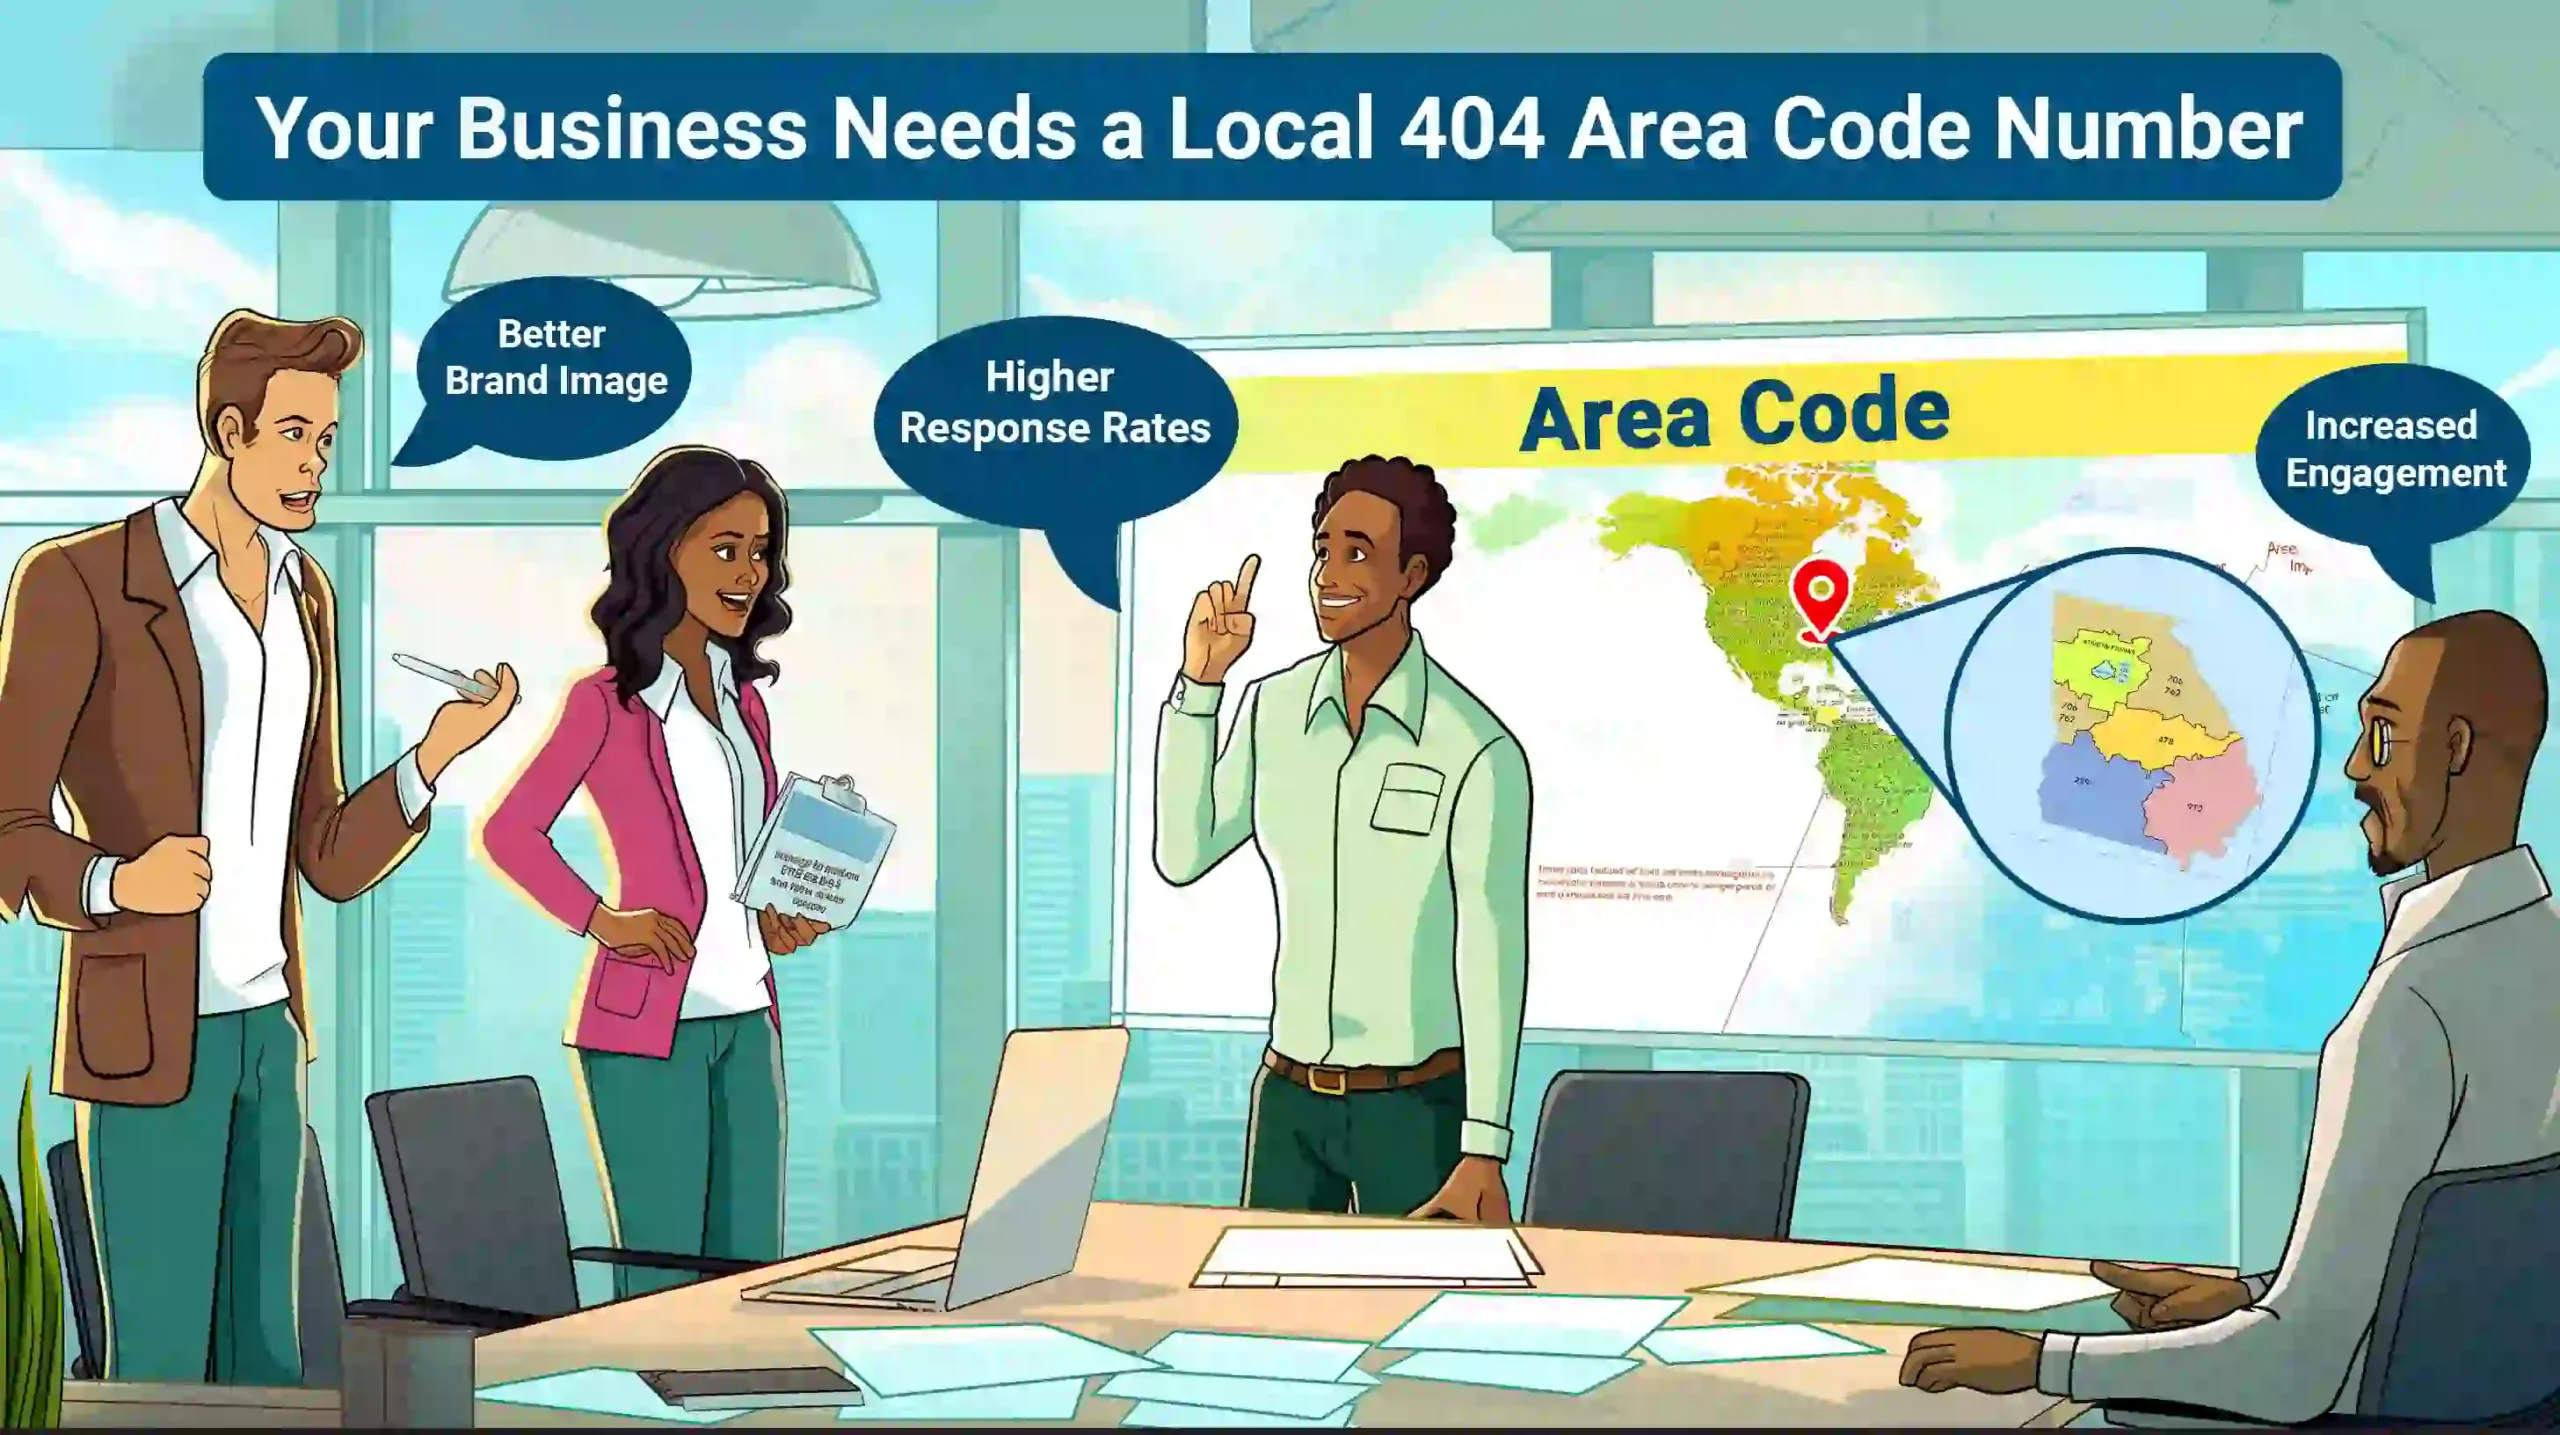 Business Needs a Local 404 Area Code Number